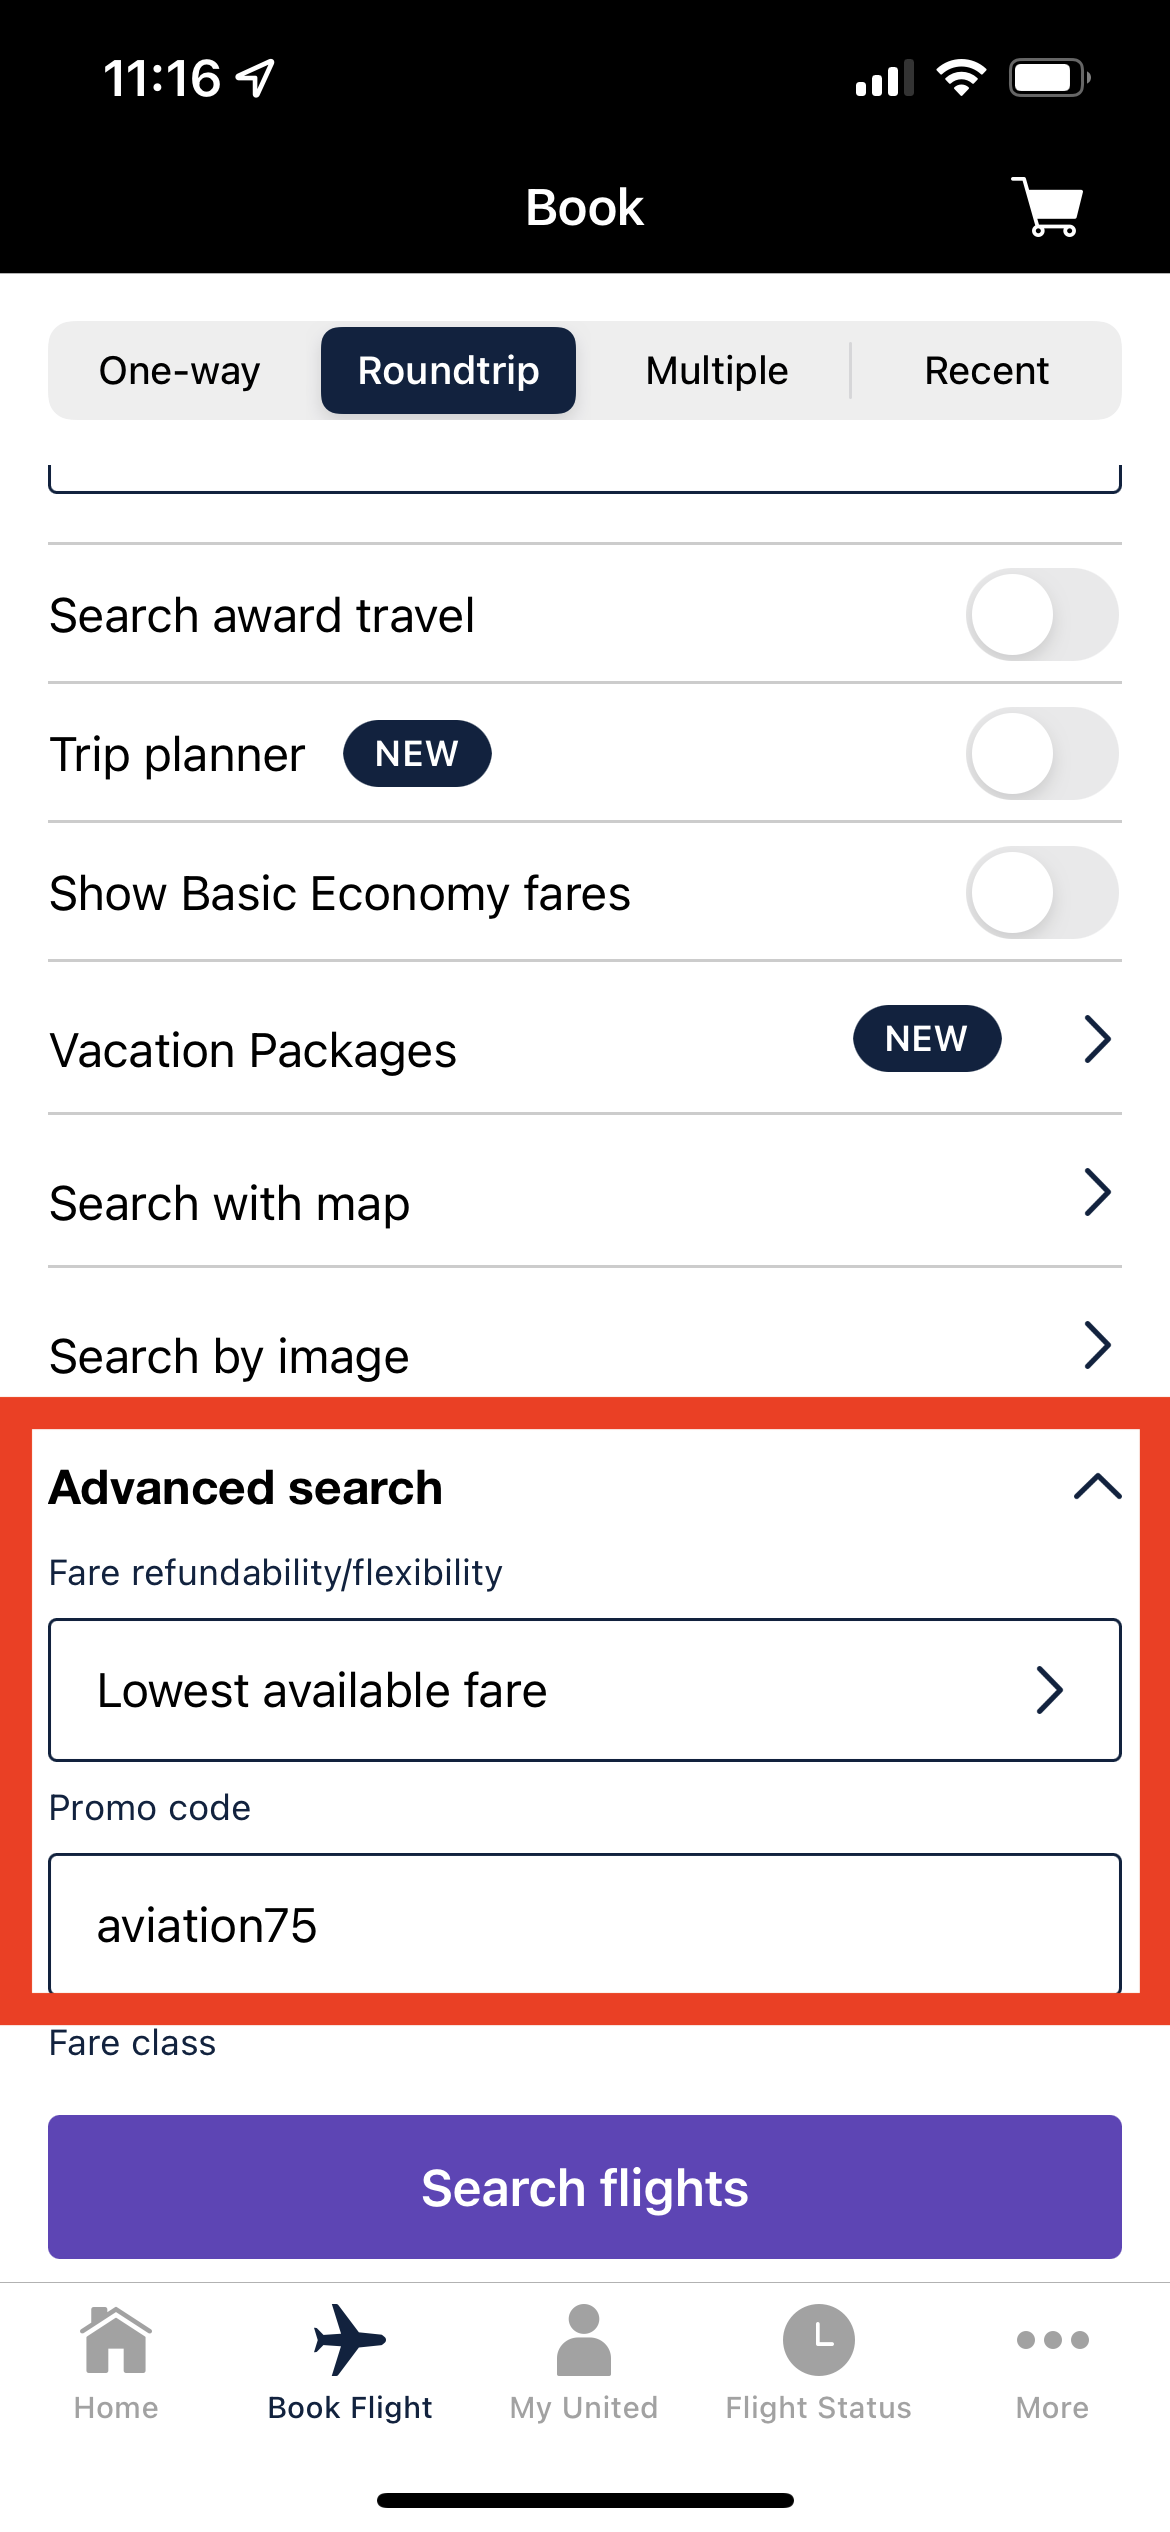 How to use code aviation75 on the United mobile app